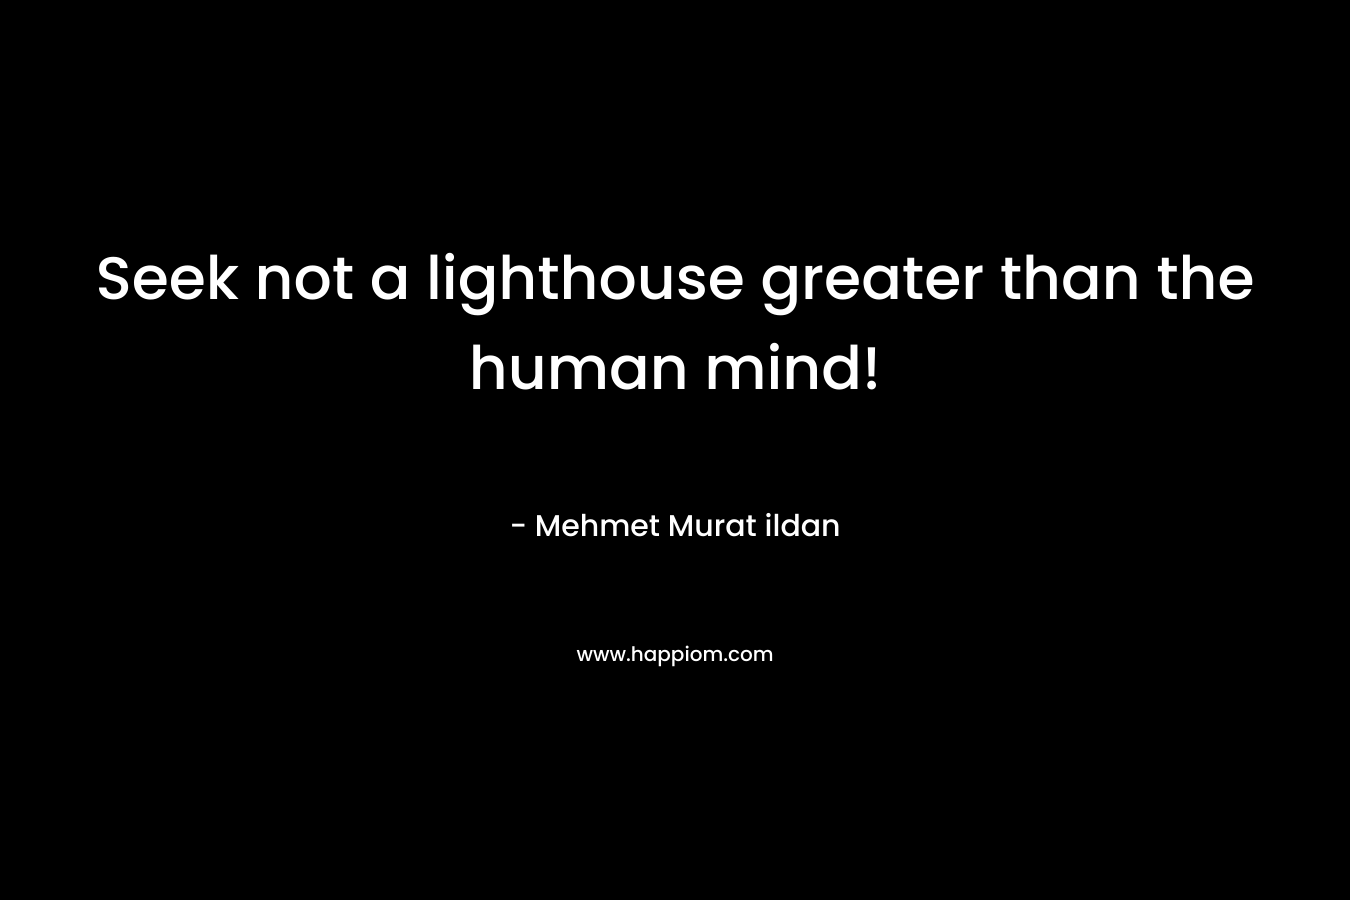 Seek not a lighthouse greater than the human mind!